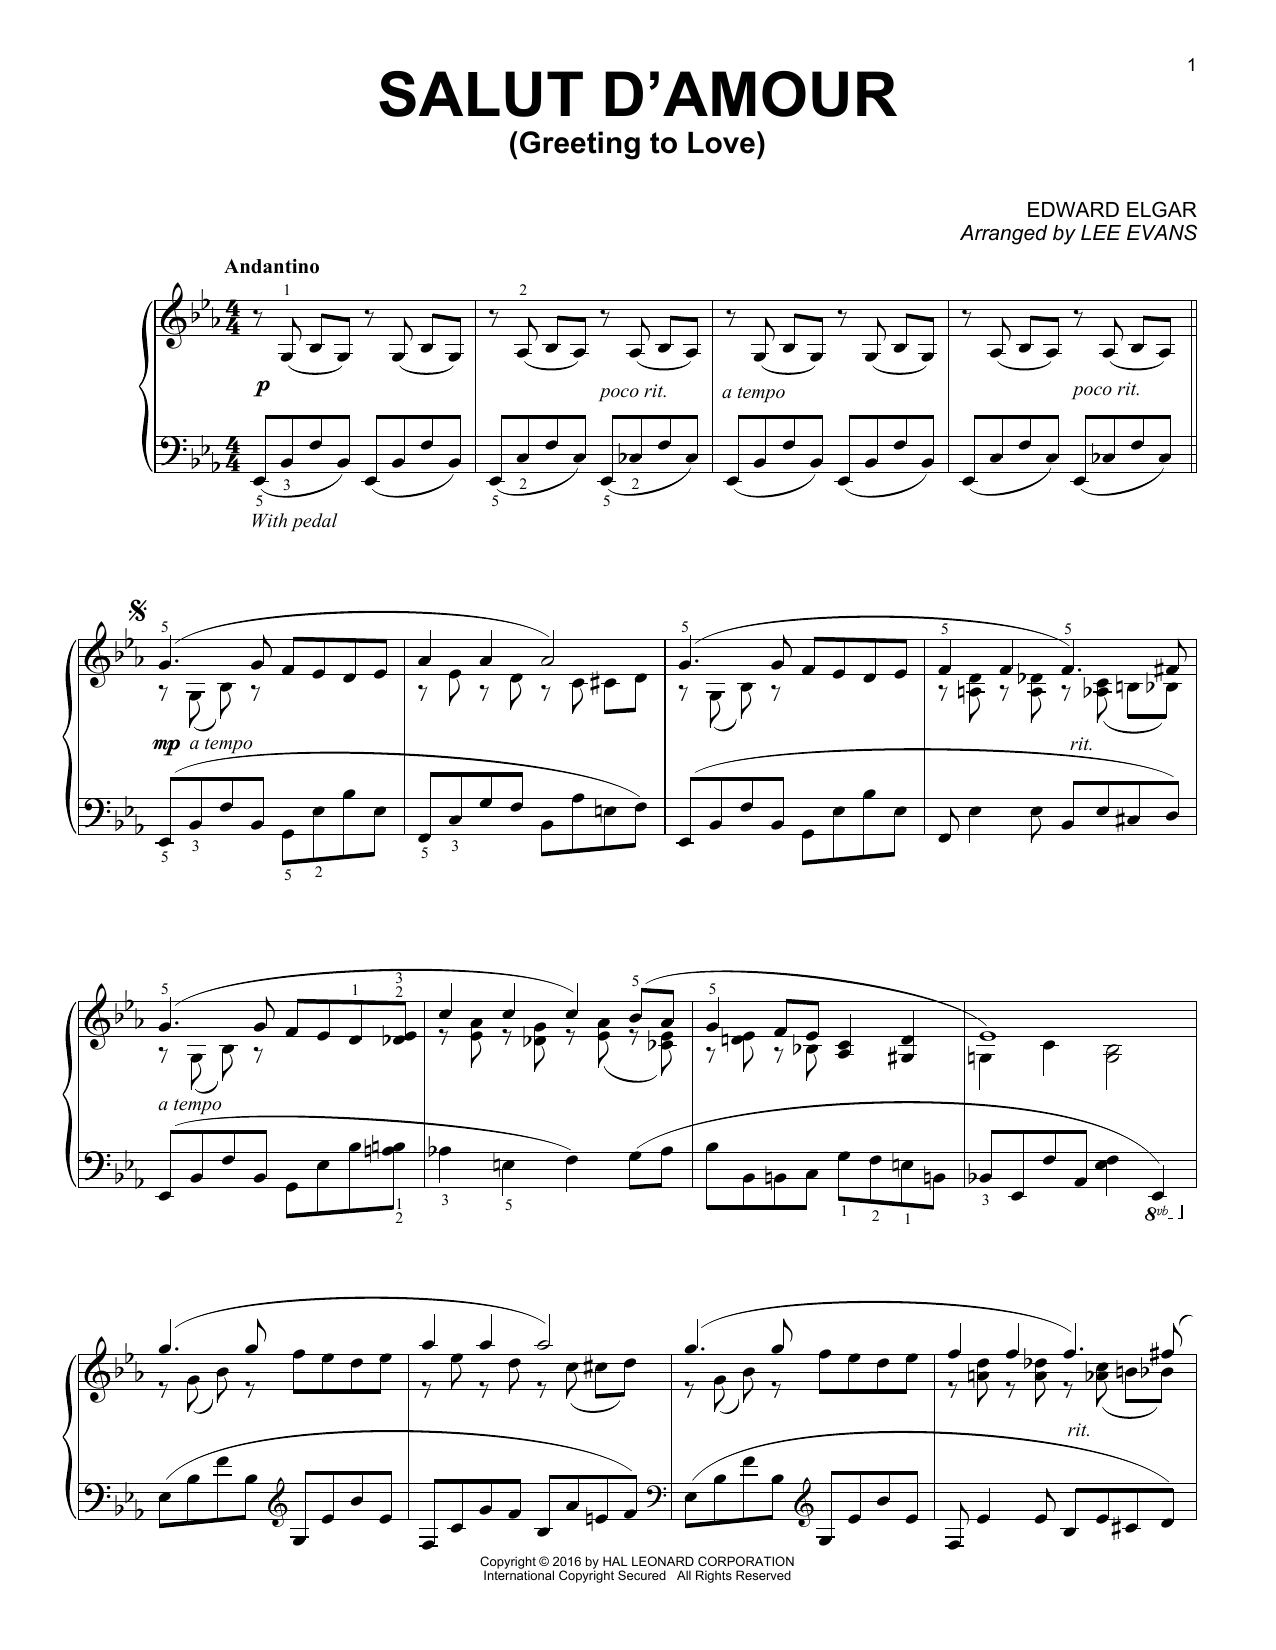 Download Lee Evans Salut D'amour (Greeting To Love) Sheet Music